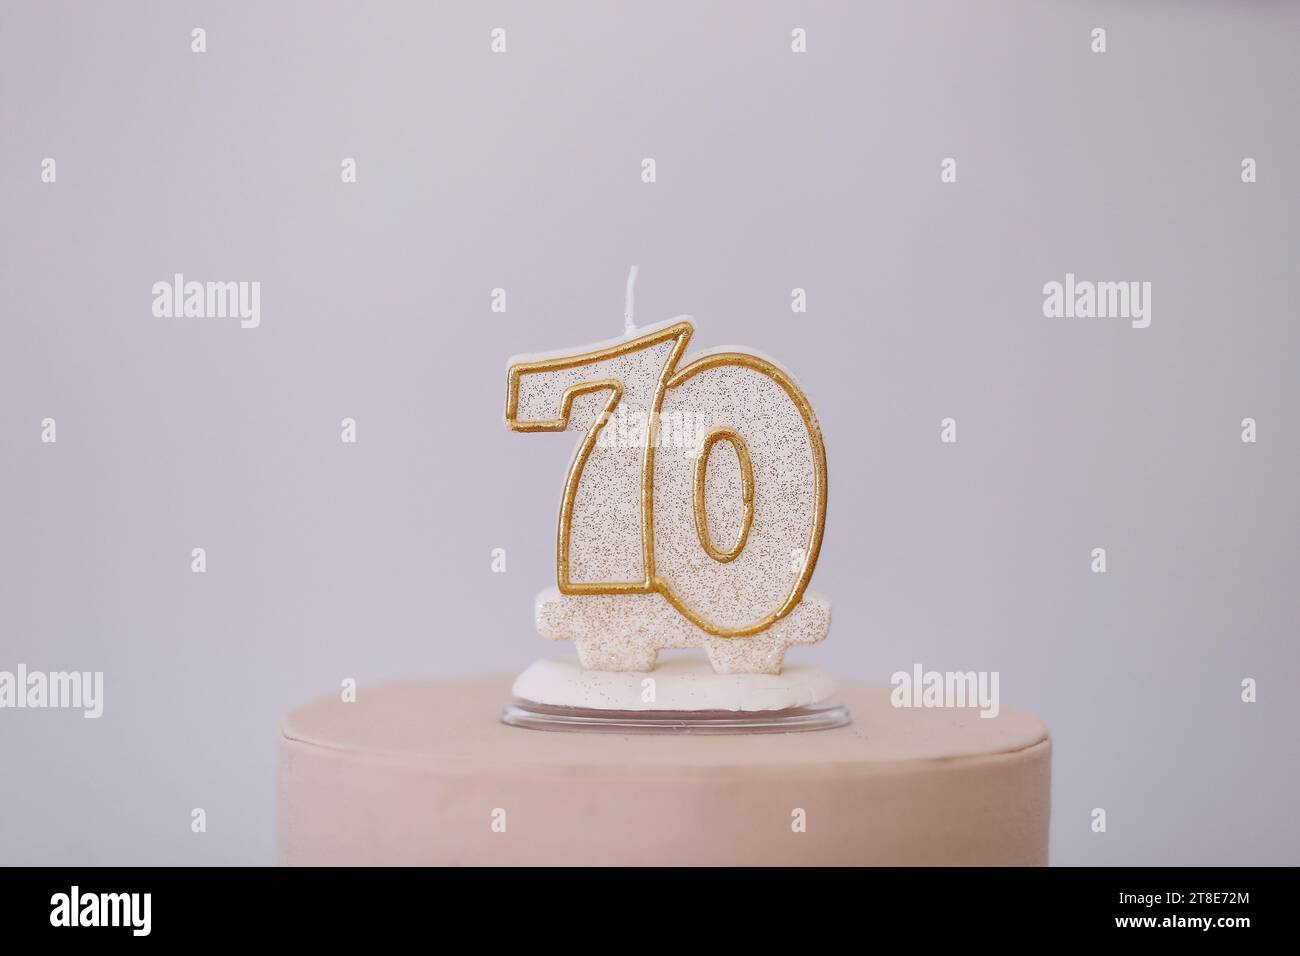 detail of the number seventy on the top of the birthday cake, 70 birthday, white cake, 70 year old birthday cake candle Stock Photo